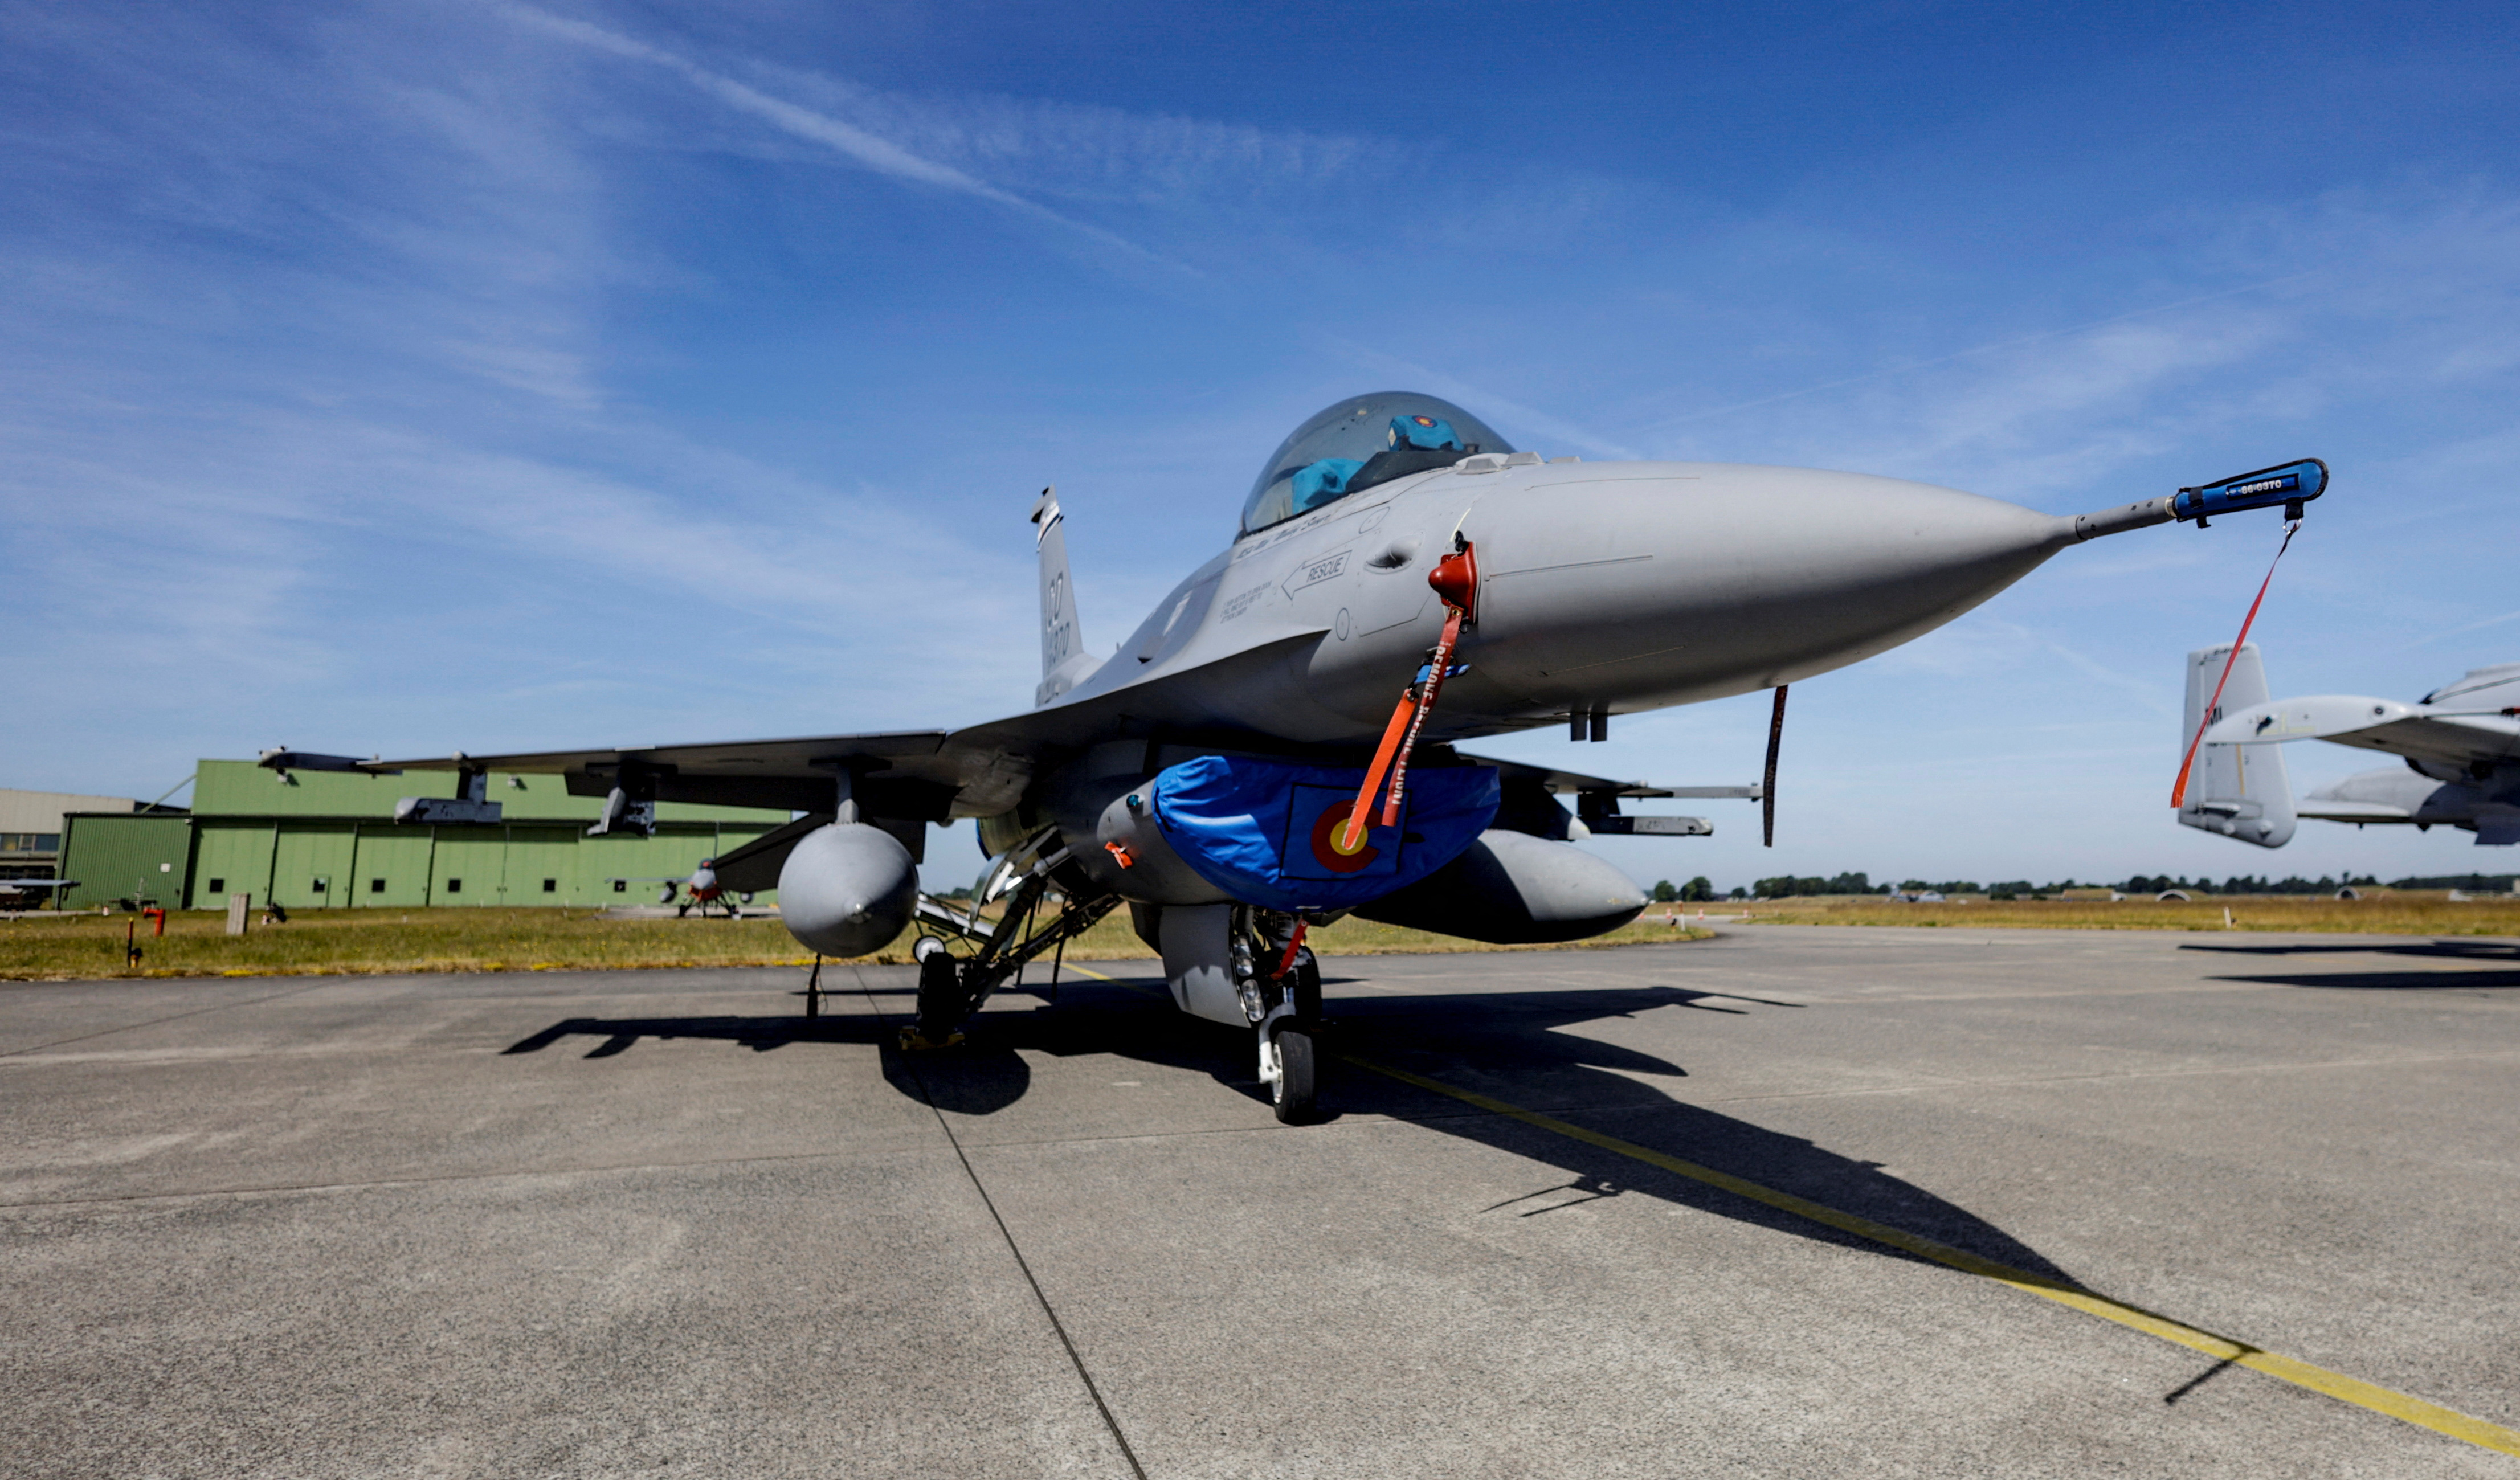 An F-16 combat jet of the US Airforce is prepared for practice flights ahead of the Air Defender Exercise 2023 at the military airport of Jagel